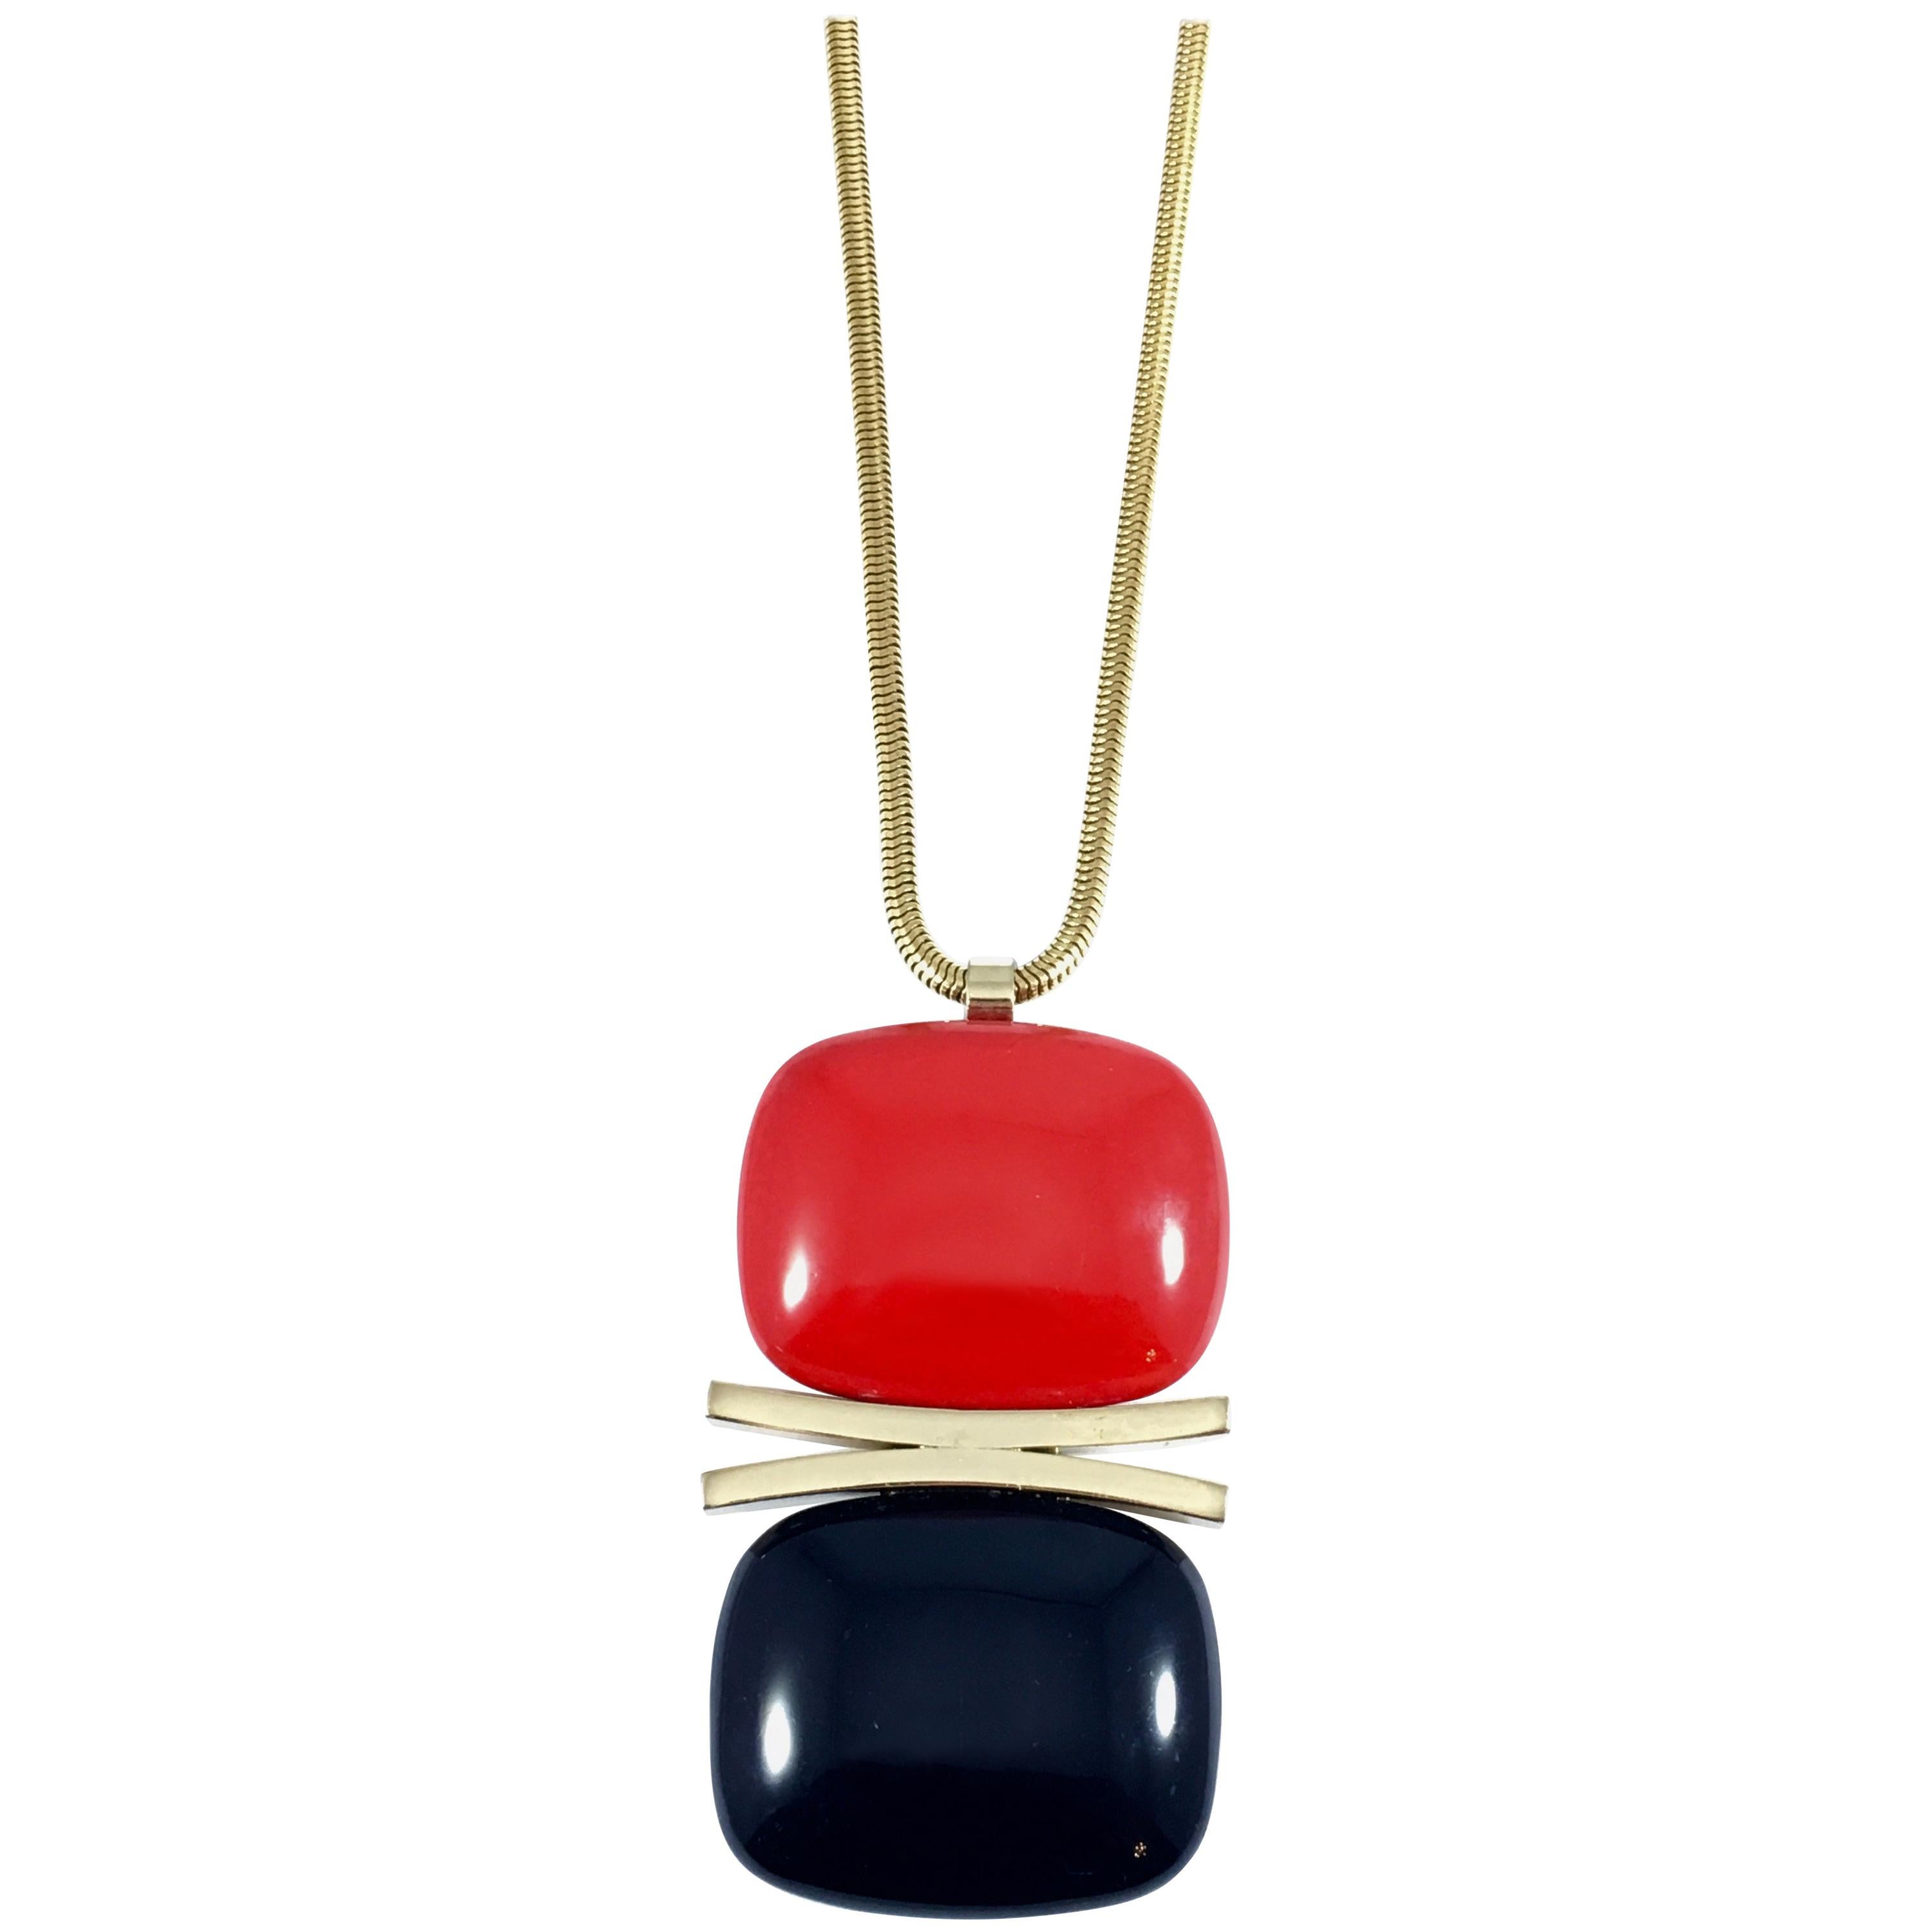 Lanvin Red and Navy Modernist Pendant Necklace, 1970s For Sale